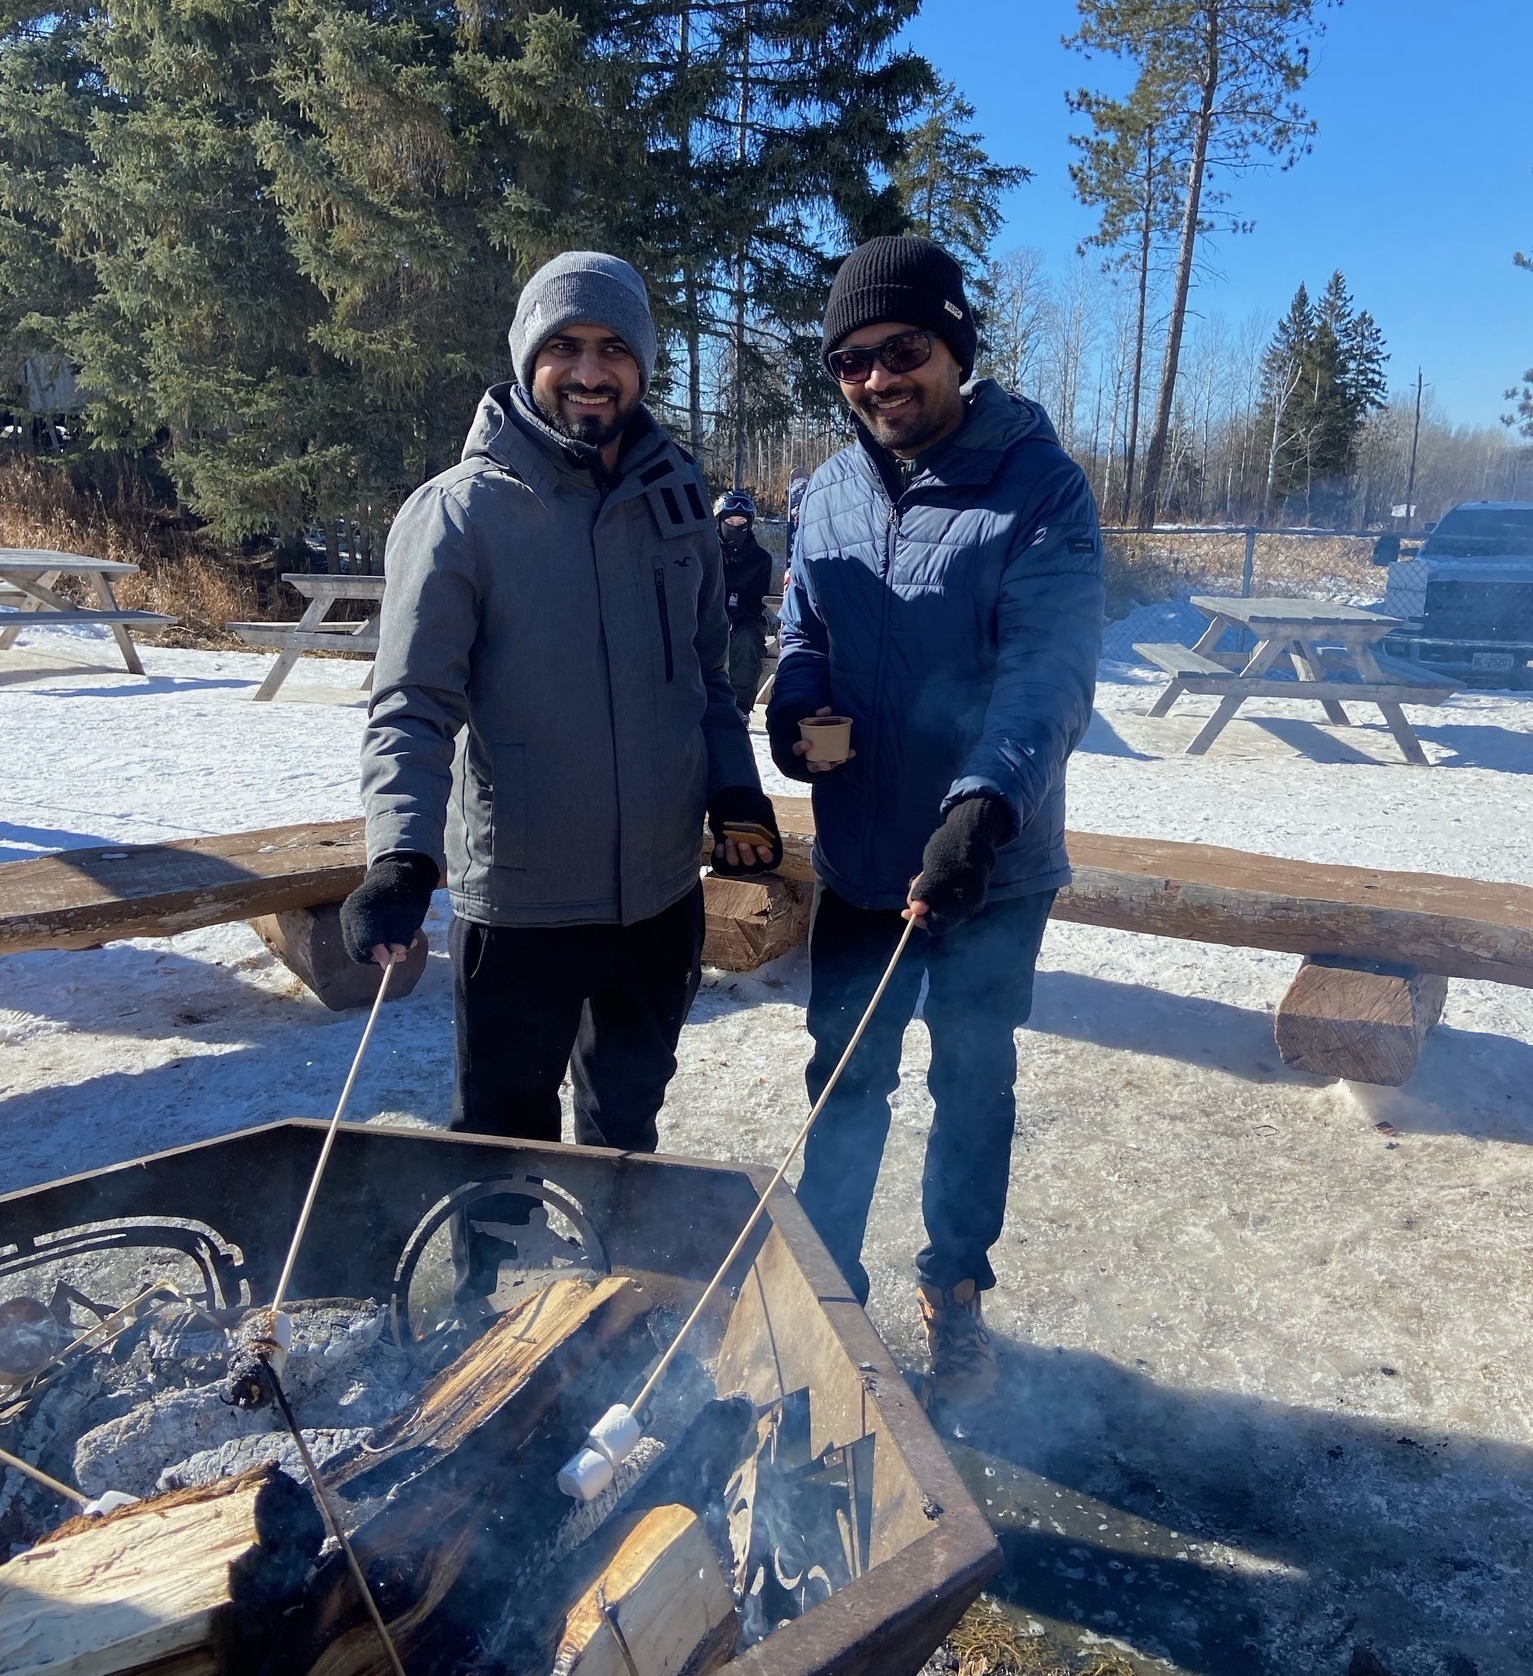 two men wearing winter outdoor clothing, smiling as they roast marshmallows over an outdoor fire on a sunny winter's day.